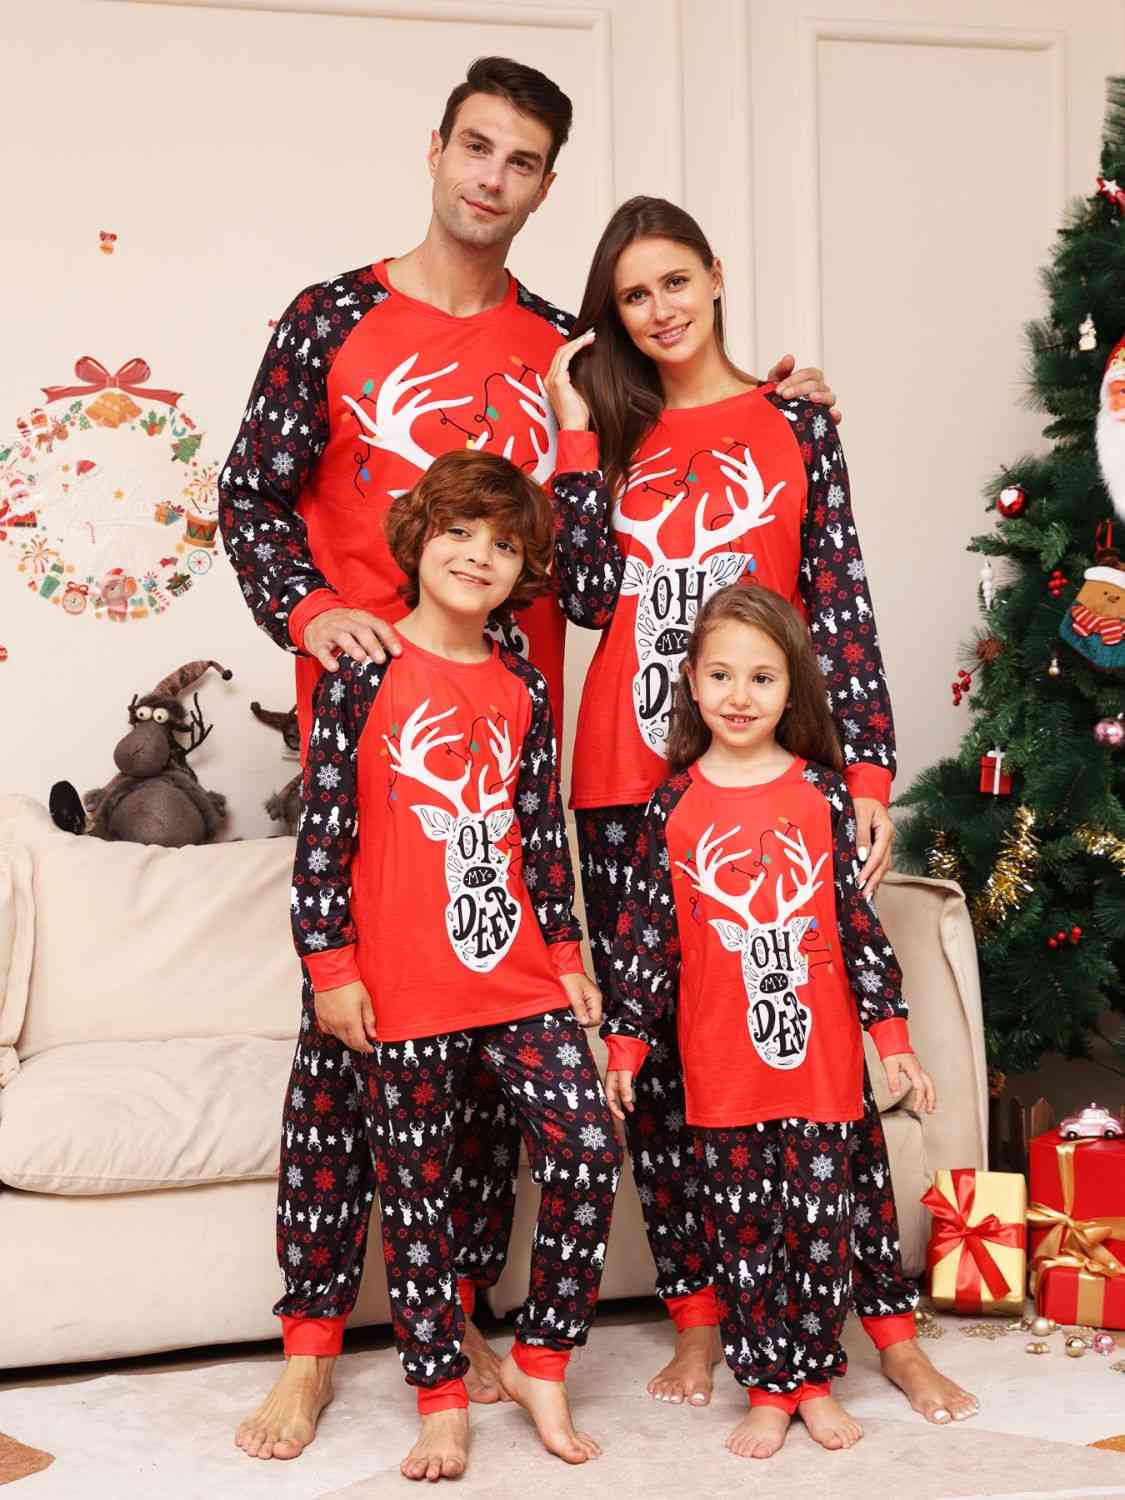 Full Size Reindeer Graphic Top and Pants Set